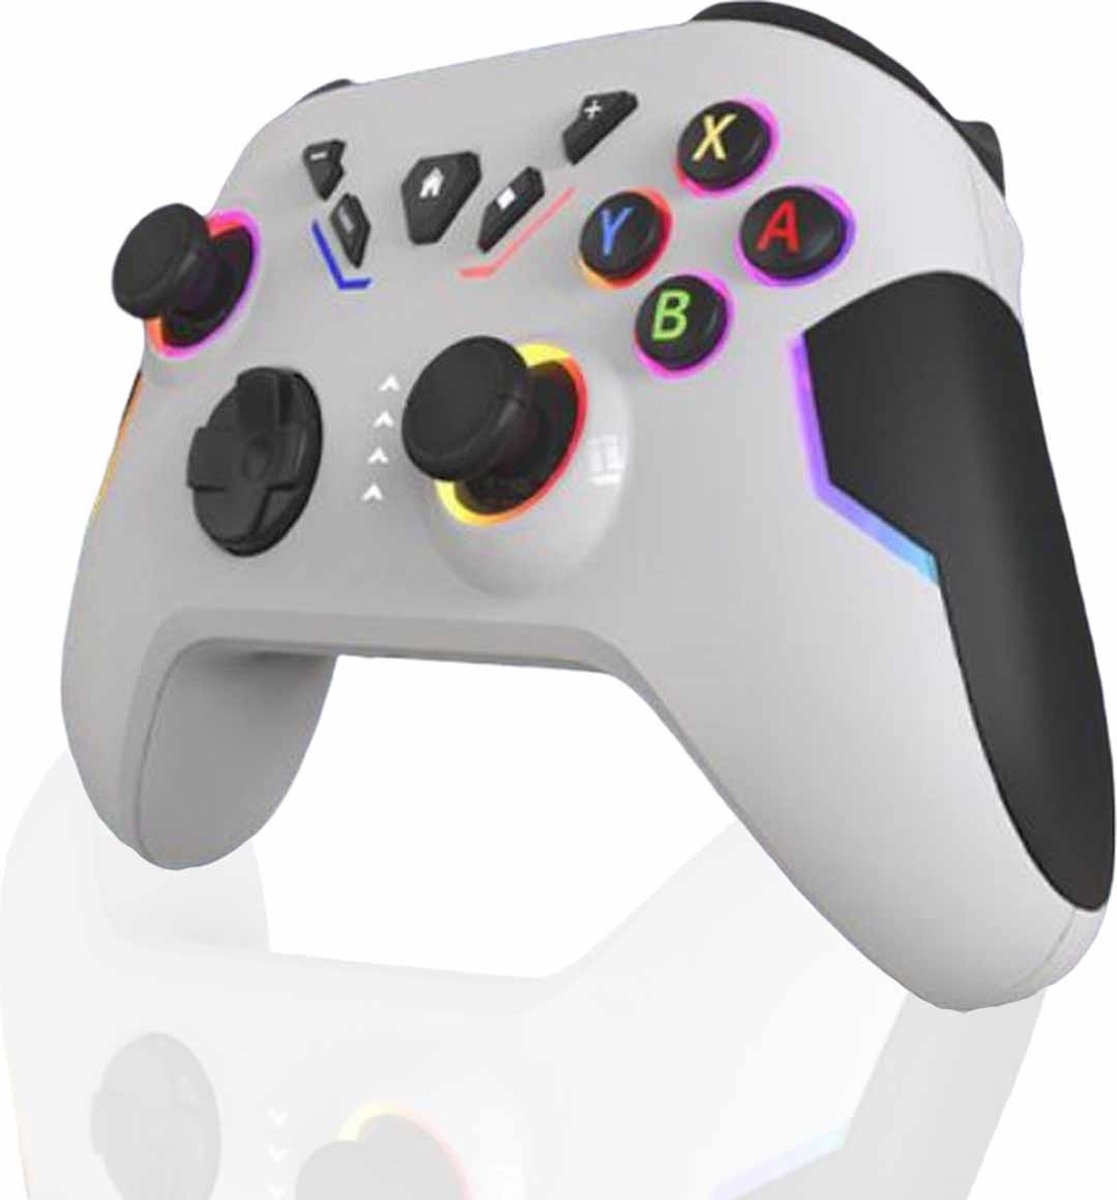 CNL Sight Pro Controller Draadloos (Kleur:Wit)-RGB Verlichting - Nintendo Switch Controller Compatibel met Switch/Switch Lite/Switch OLED/IOS/Android/Windows,- Wireless Switch Pro Controller met LED-kleurlicht/Dual shock/Turbo/Motion Control